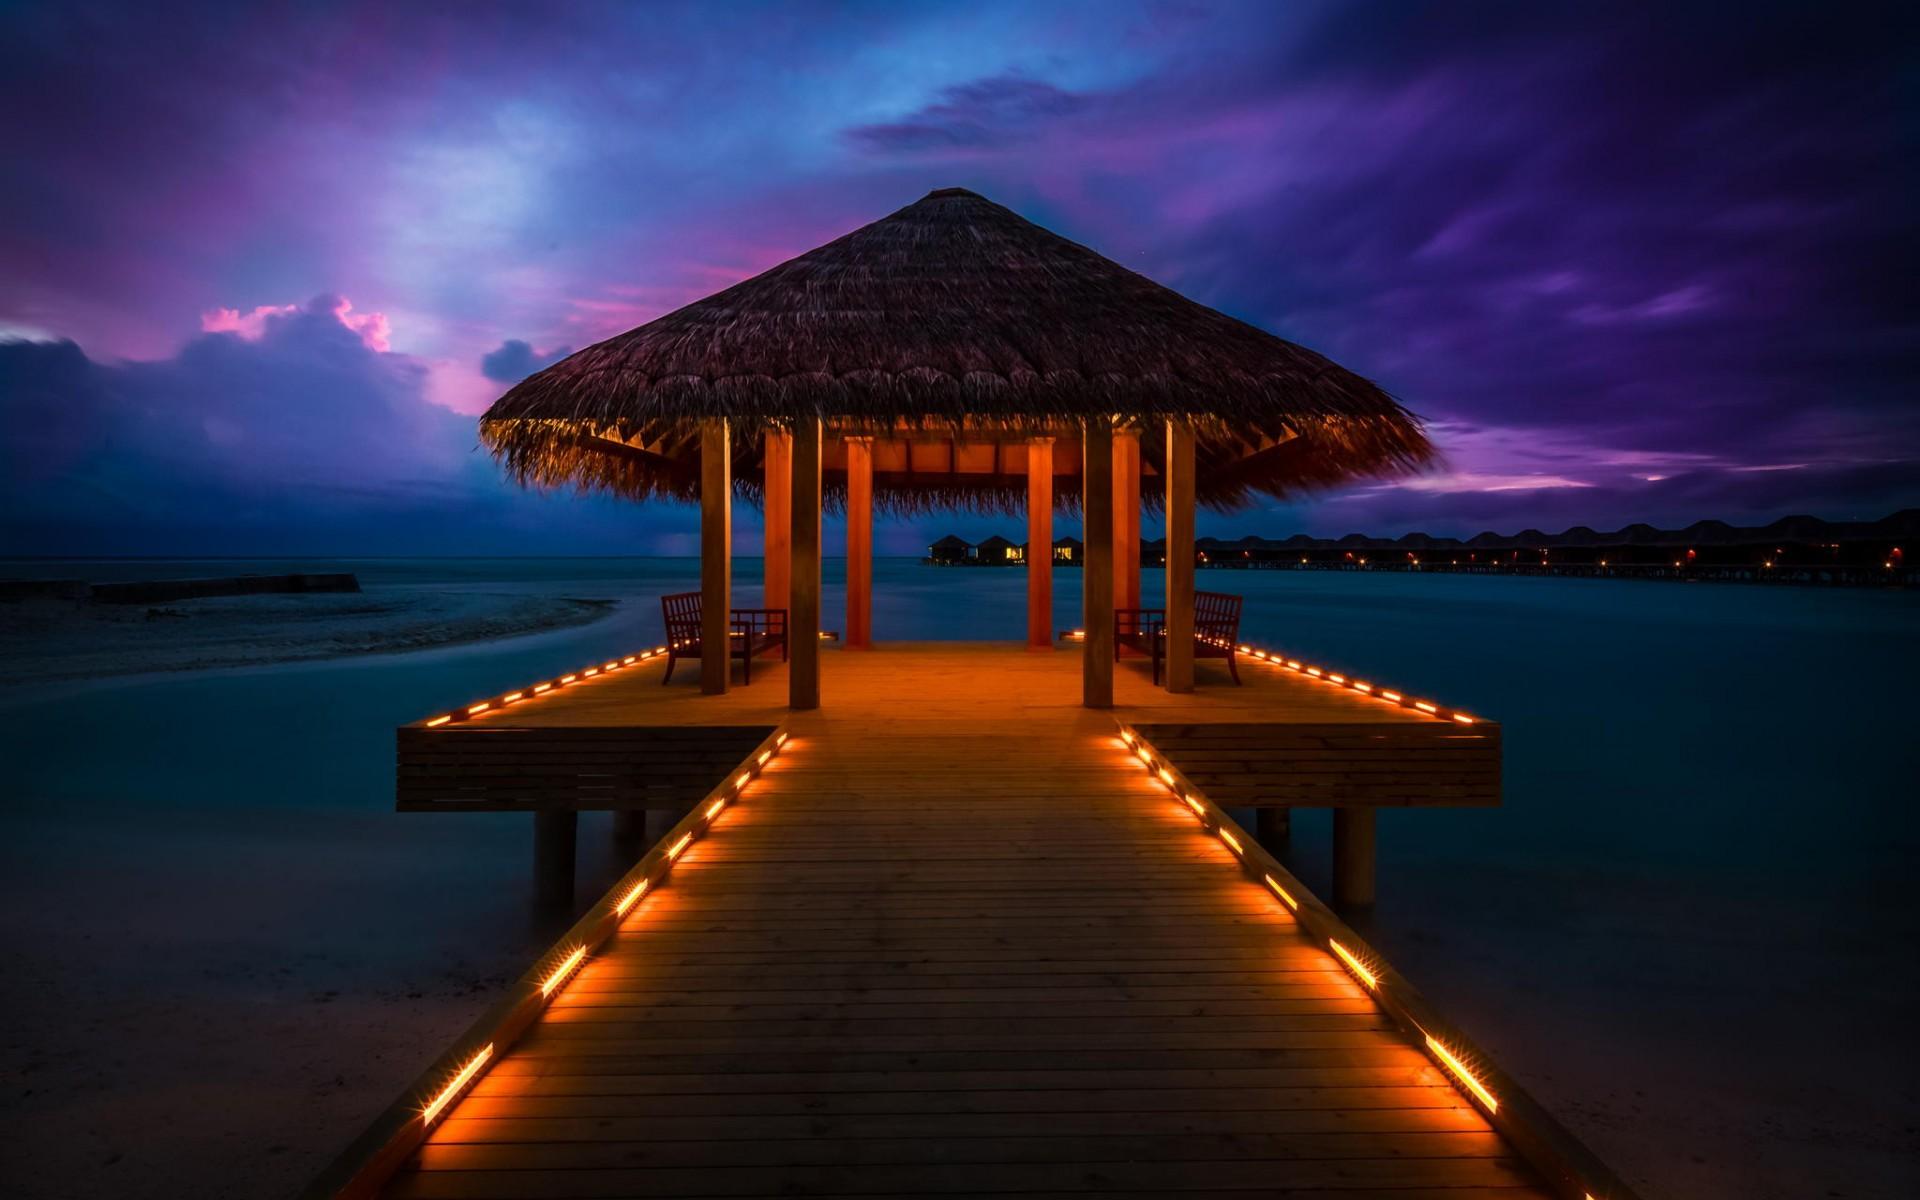 Lighted Pier in the Maldives HD Wallpaper. Background Image